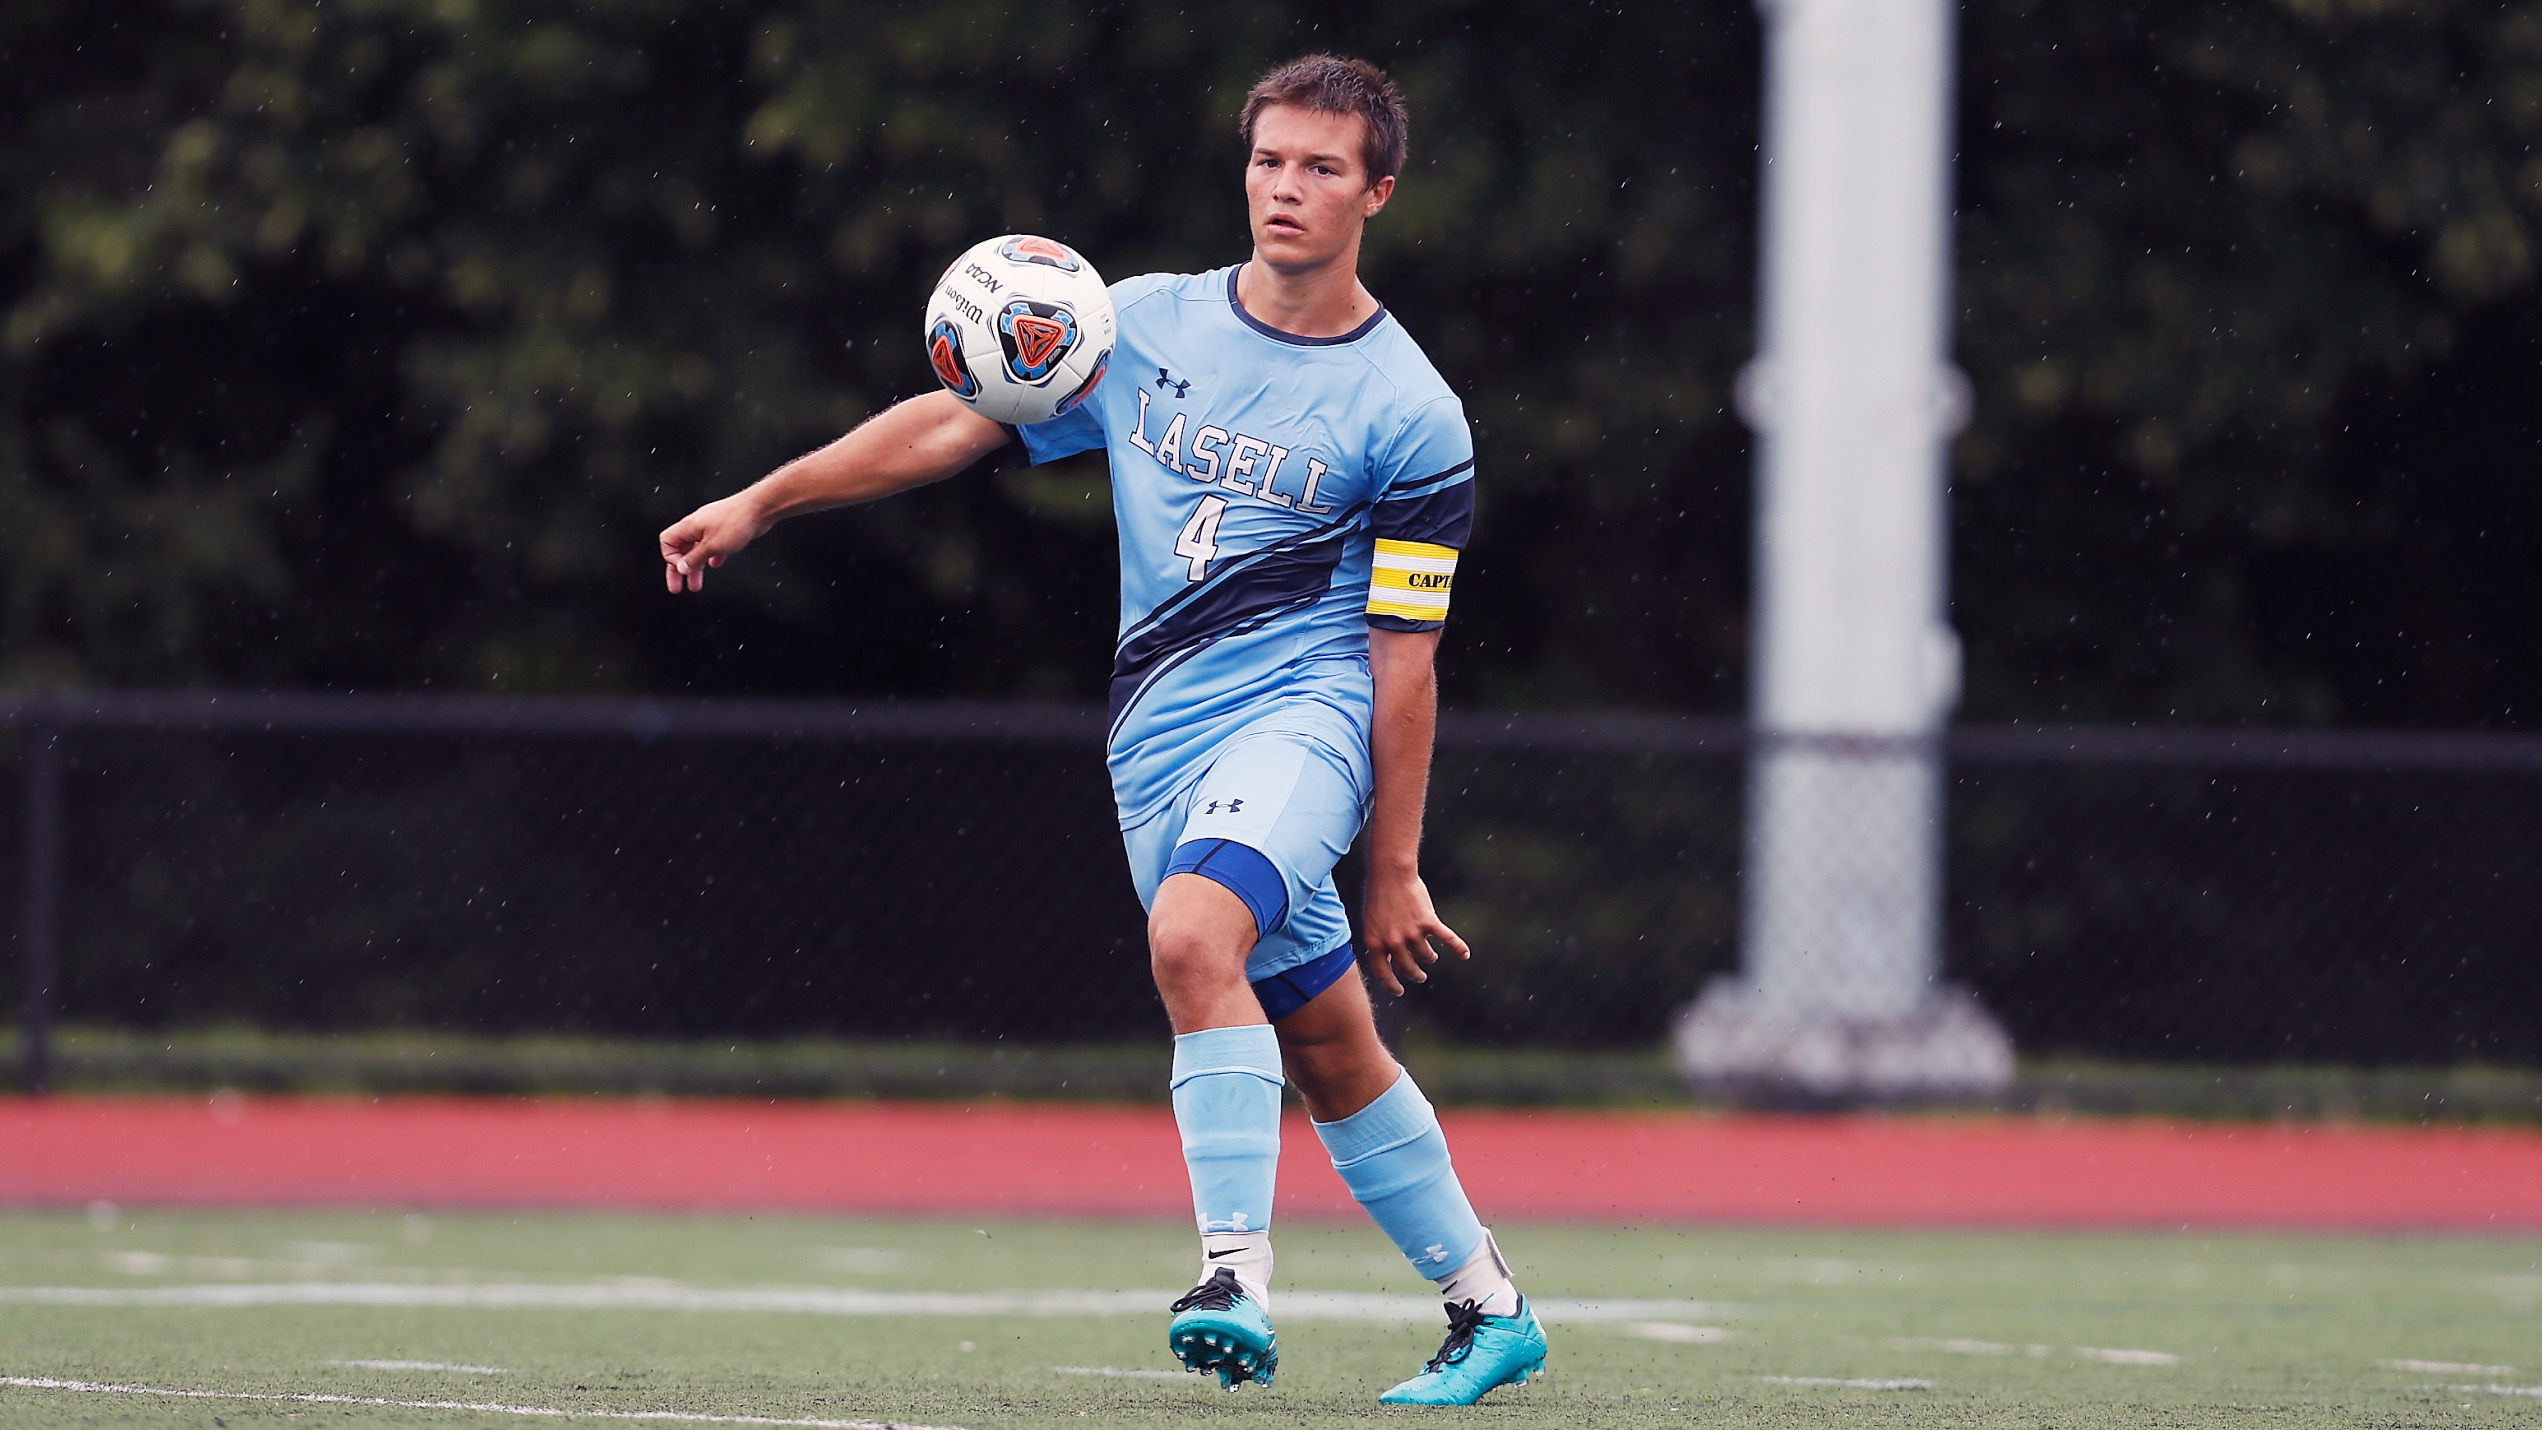 MSOC: Lasers bag first win of the season in overtime